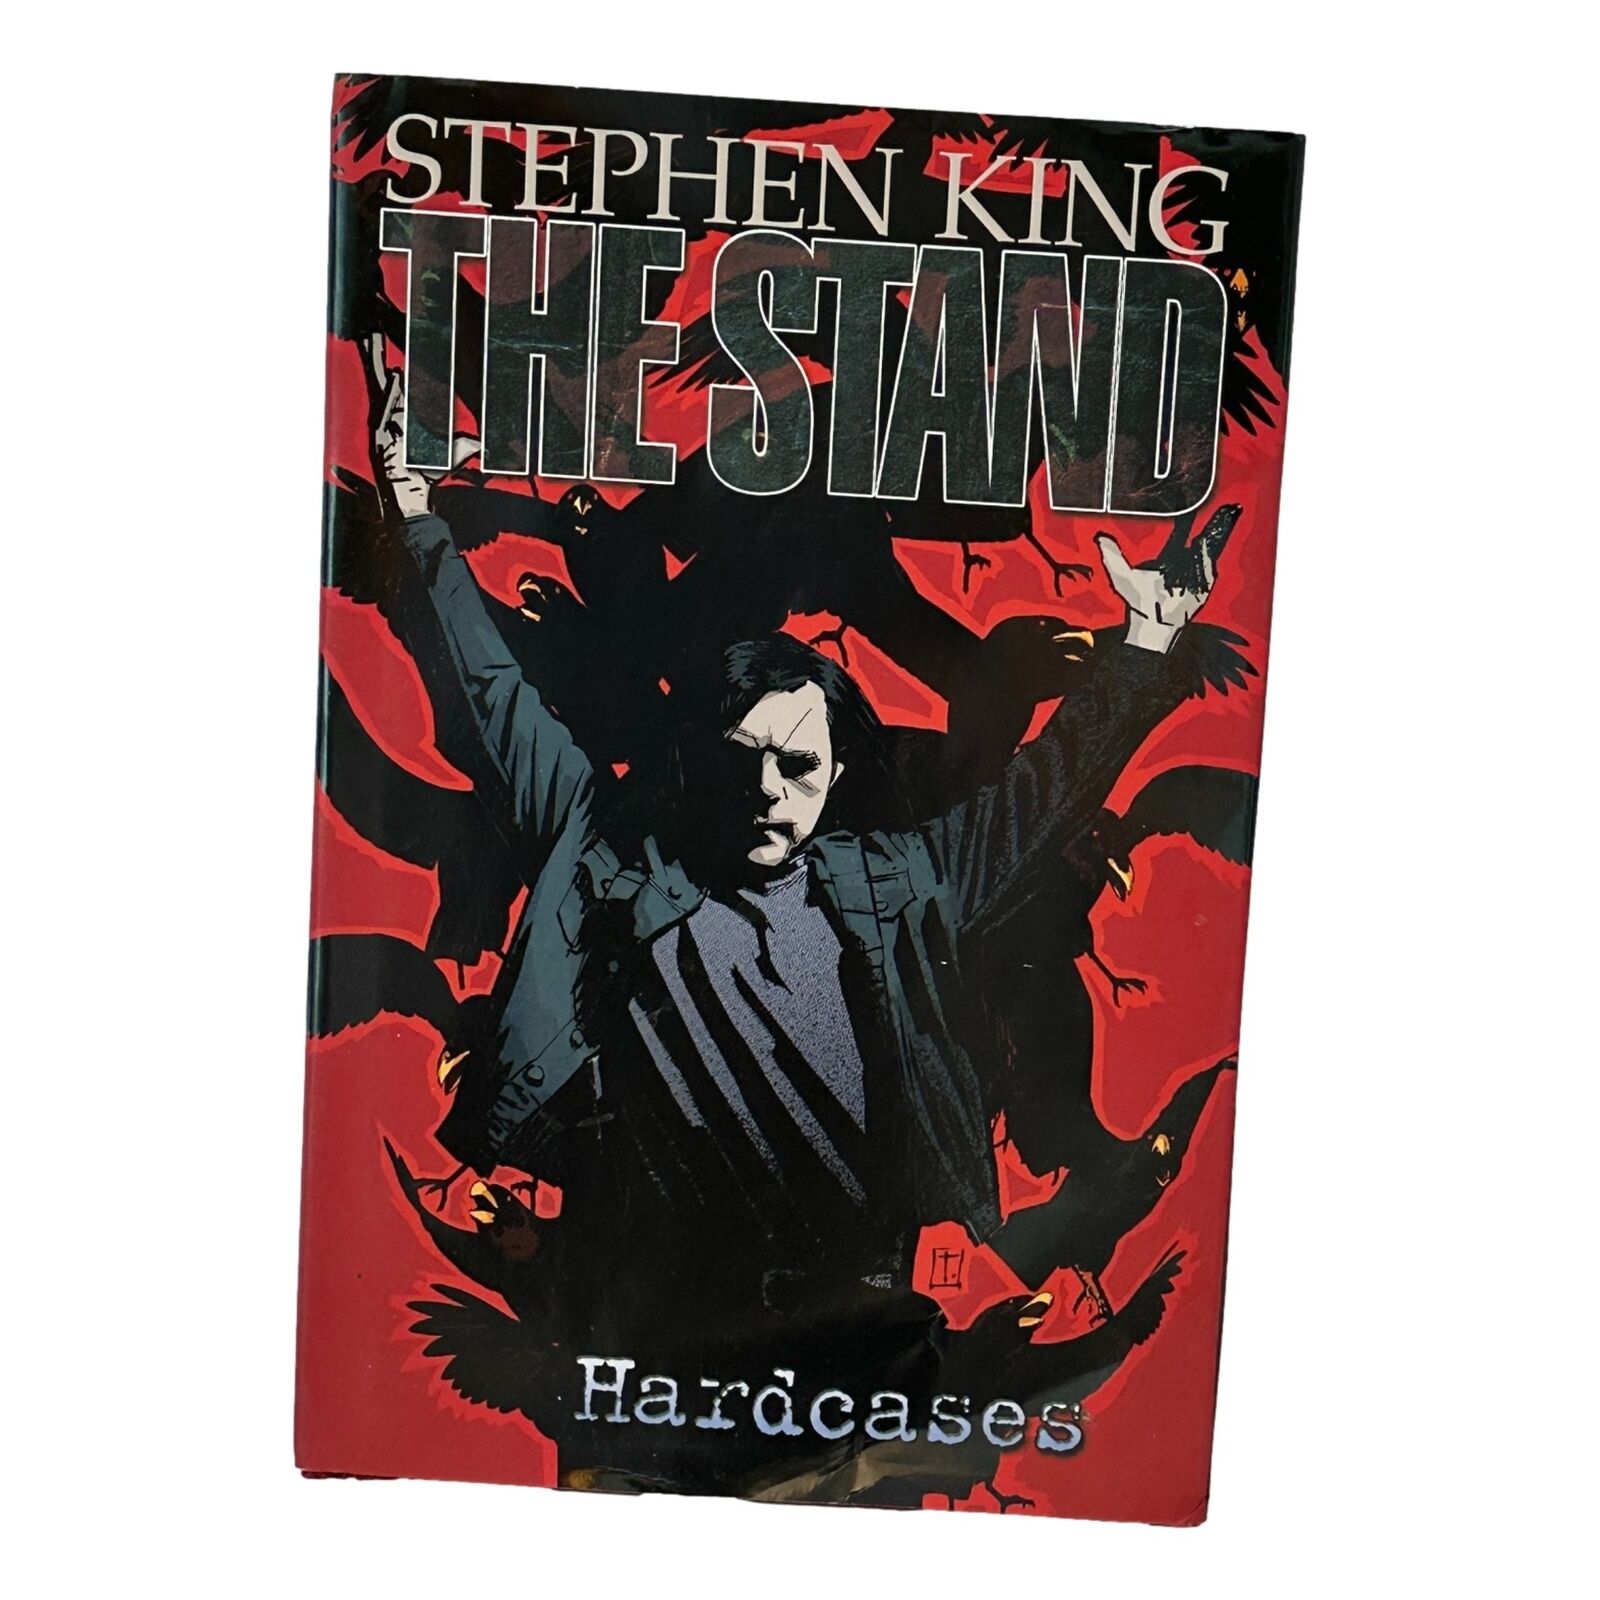 Stephen King The Stand Hardcases Graphic Novel Book First Edition 2011 HC DJ